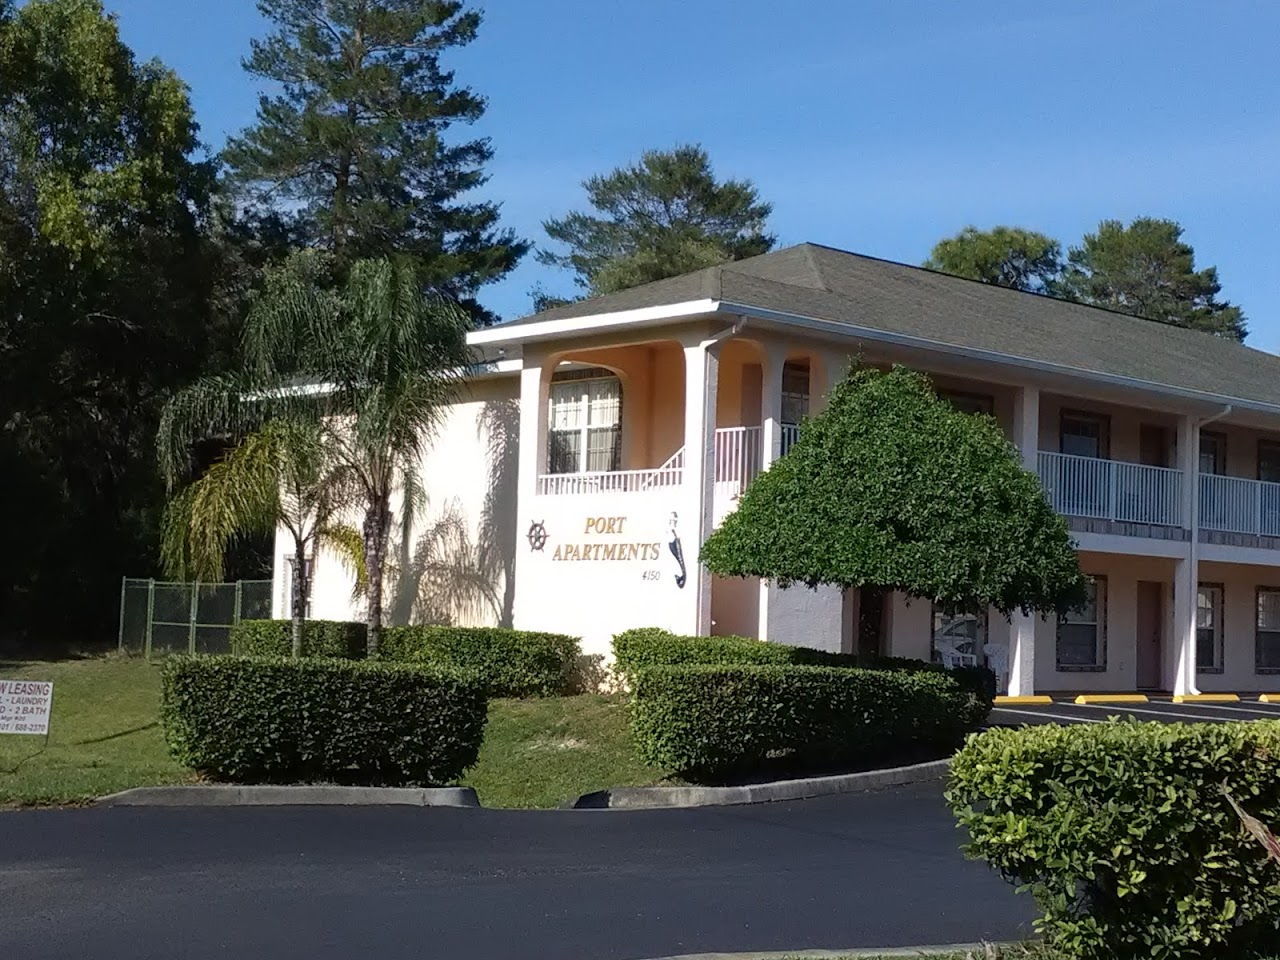 Photo of PORTILLO. Affordable housing located at 3474 PORTILLO RD SPRING HILL, FL 34609